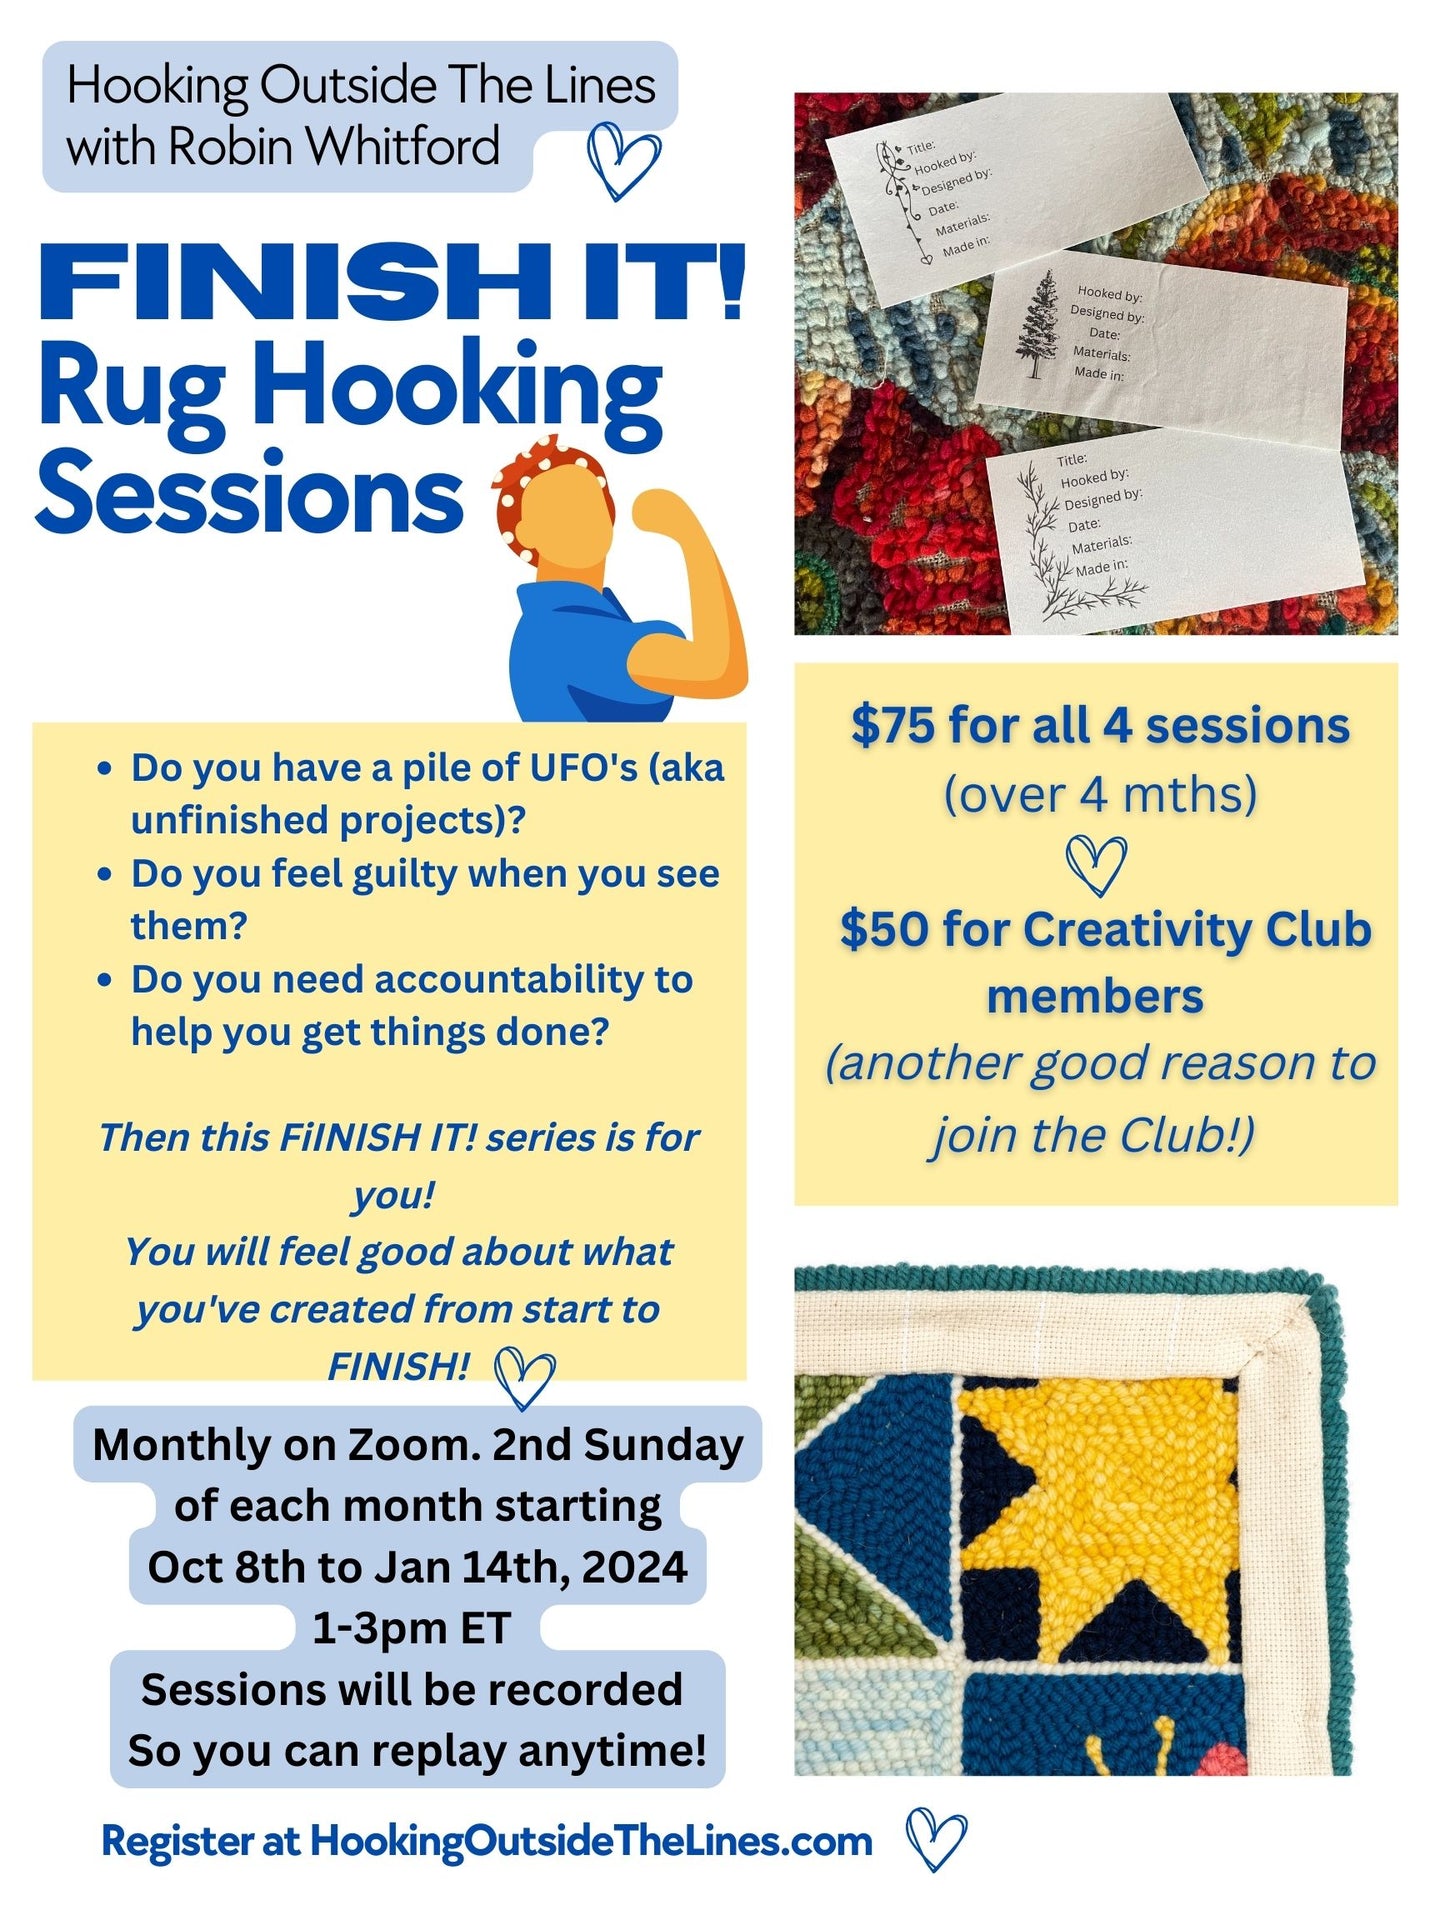 FINISH IT! Rug Hooking Sessions